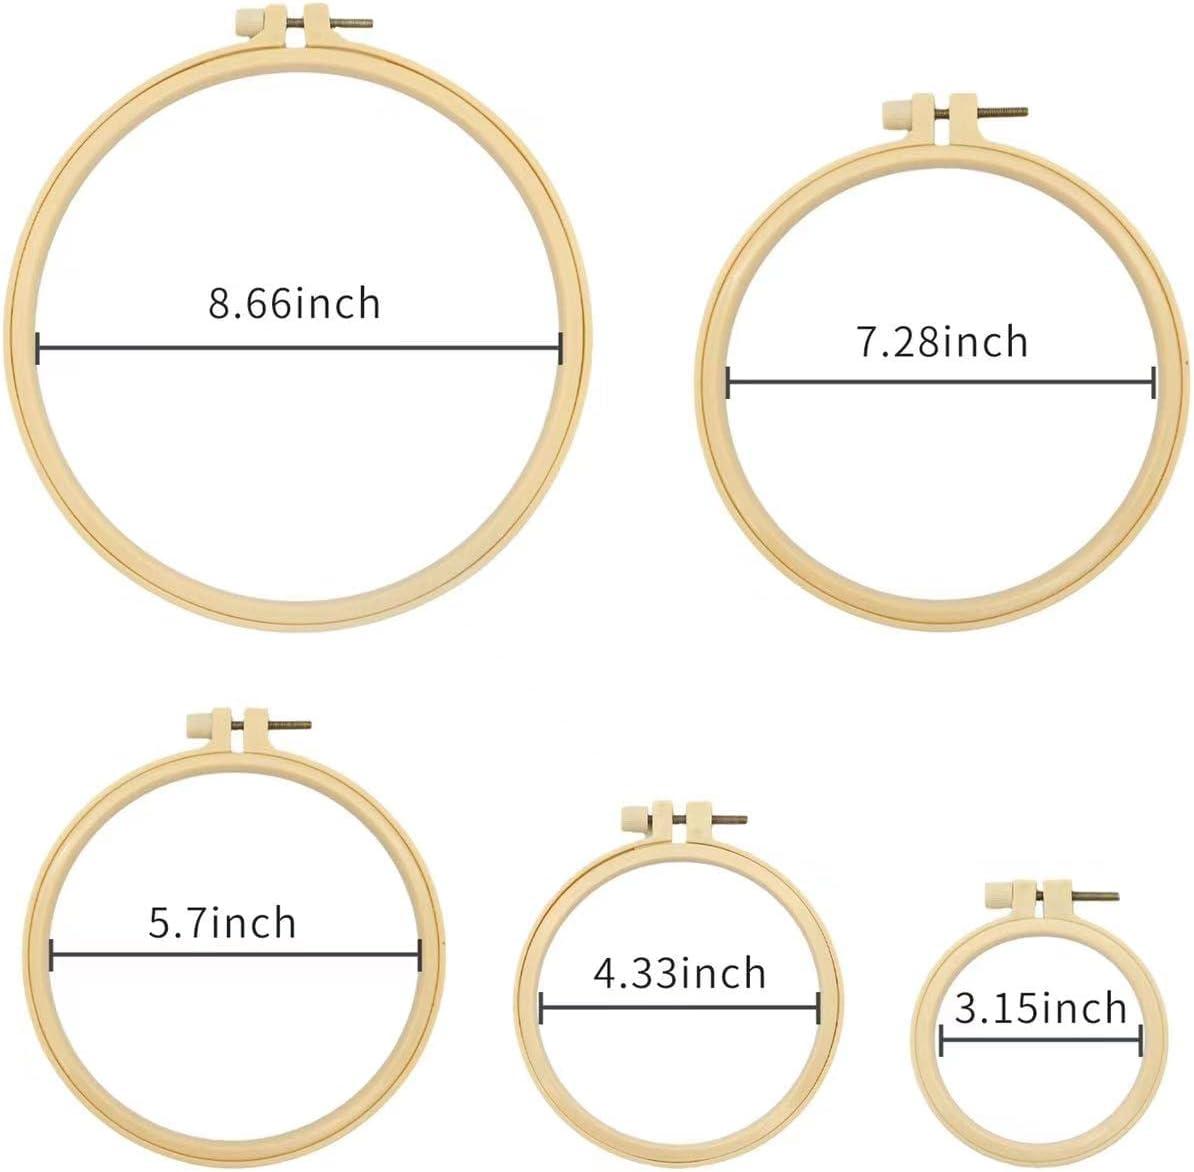 3 inch embroidery hoop